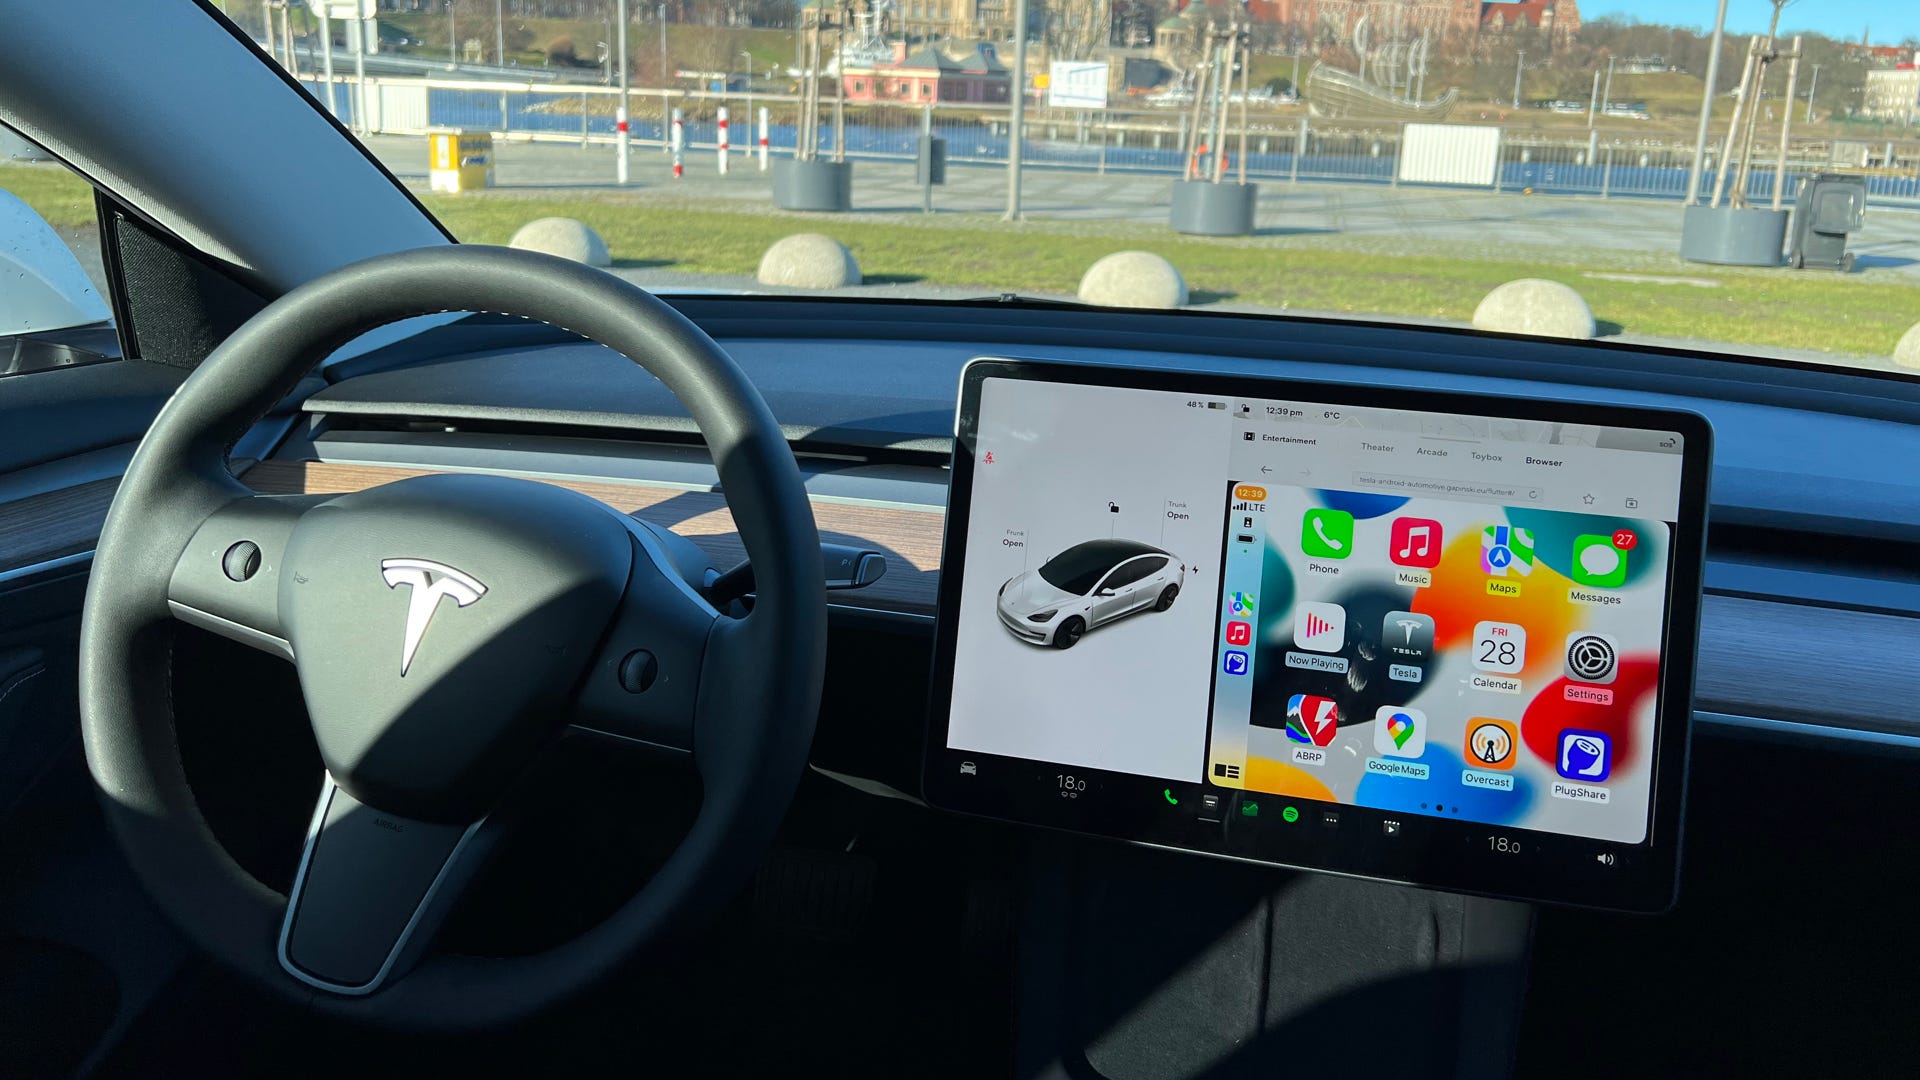 This Clever Raspberry Pi Hack Adds Android Auto to Tesla Vehicles